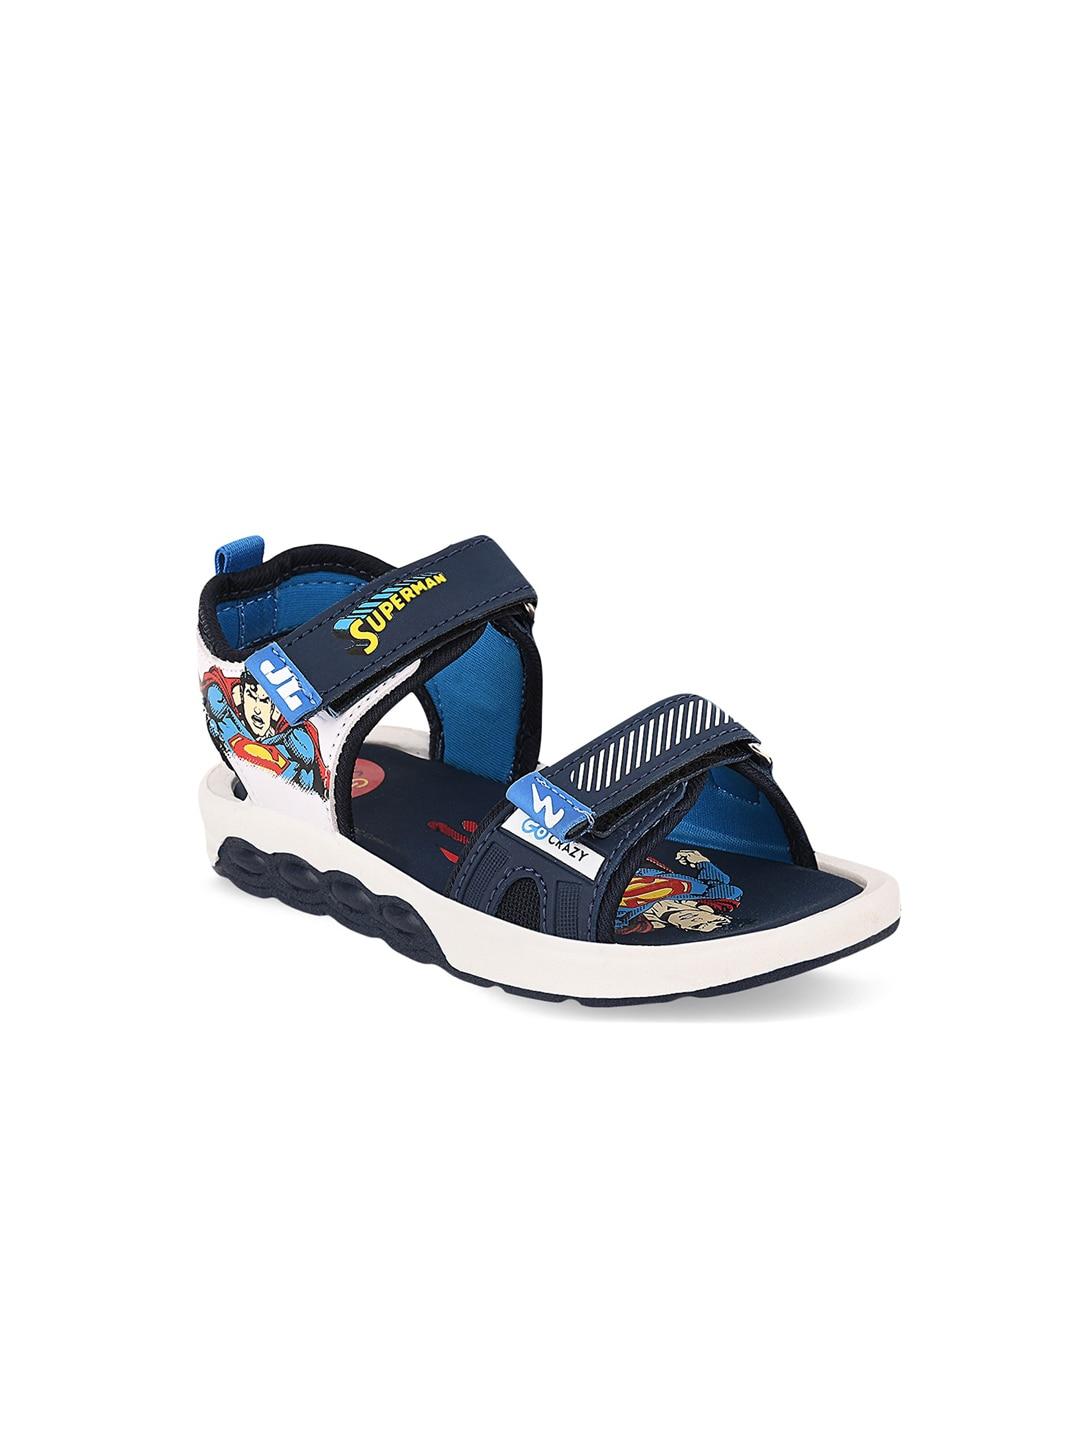 campus-kids-navy-blue-patterned-sports-sandals